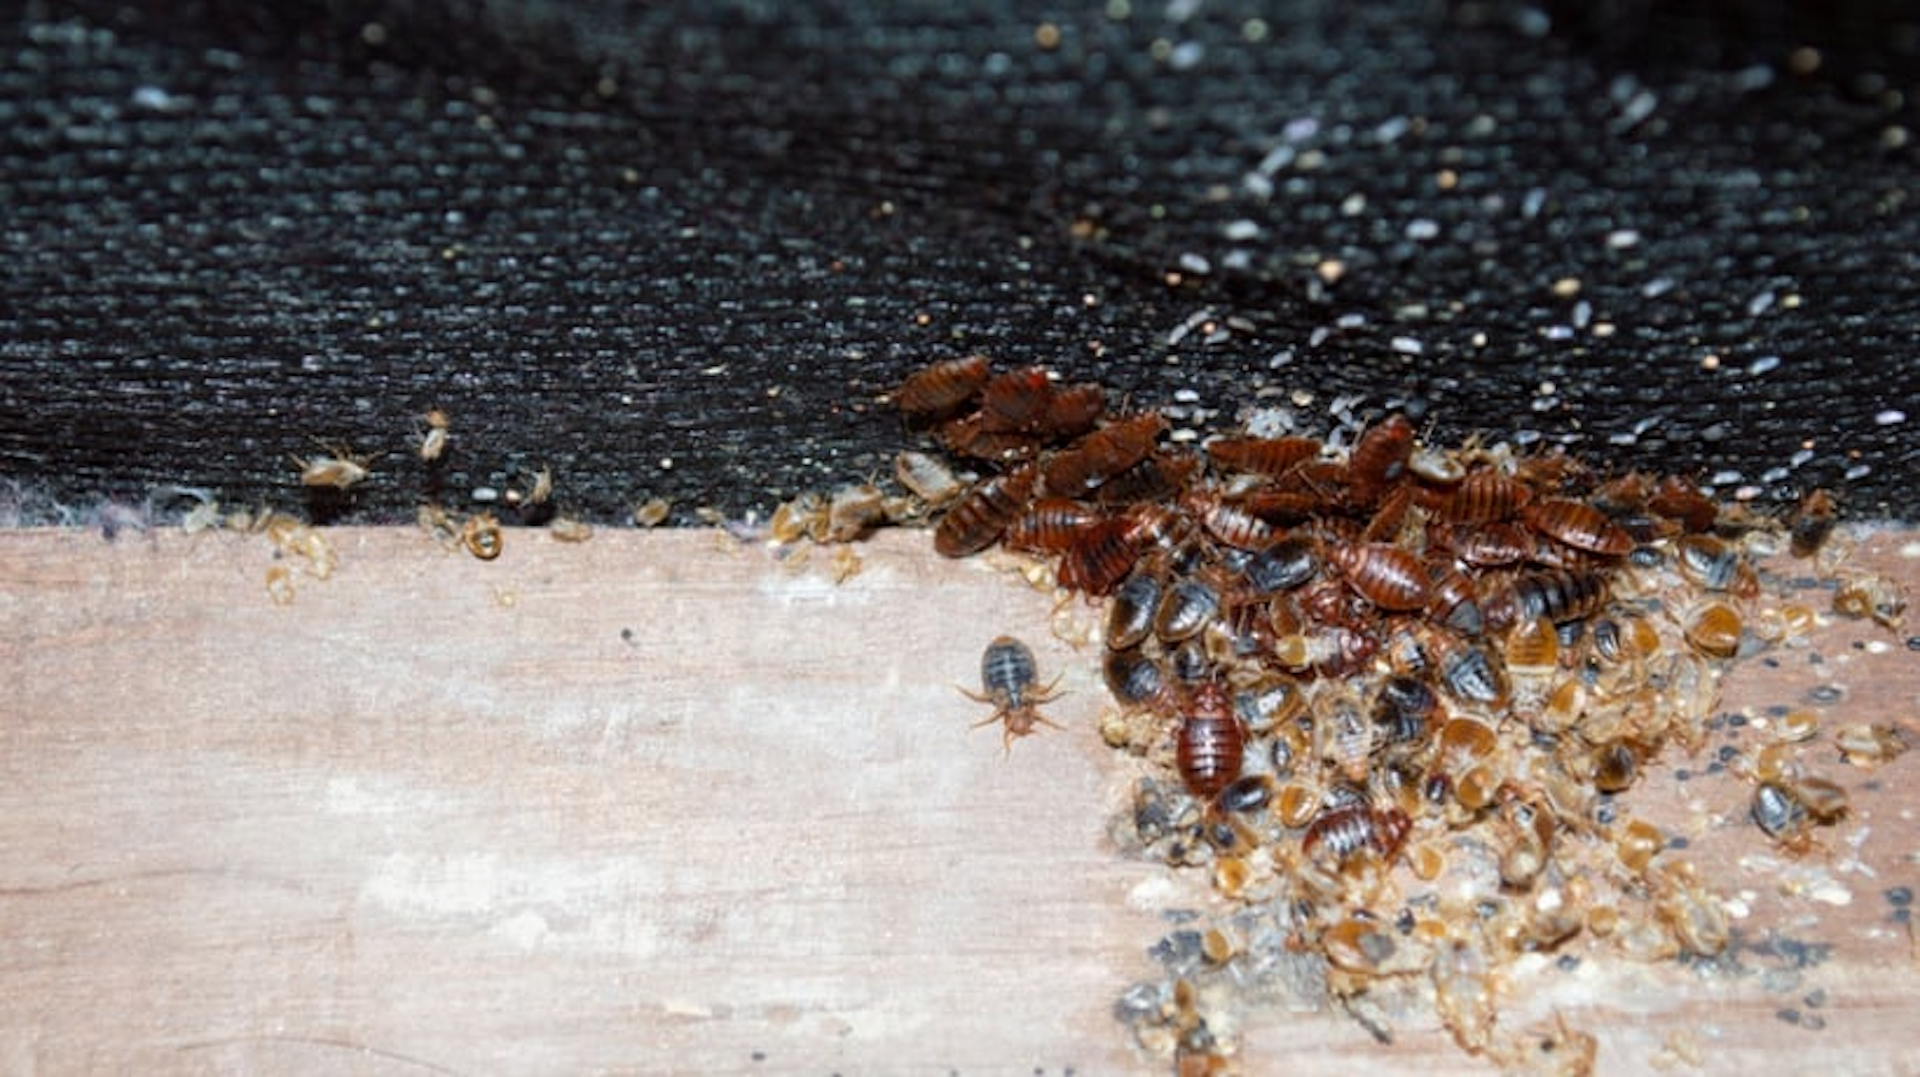 Bed bugs are more common than you might think